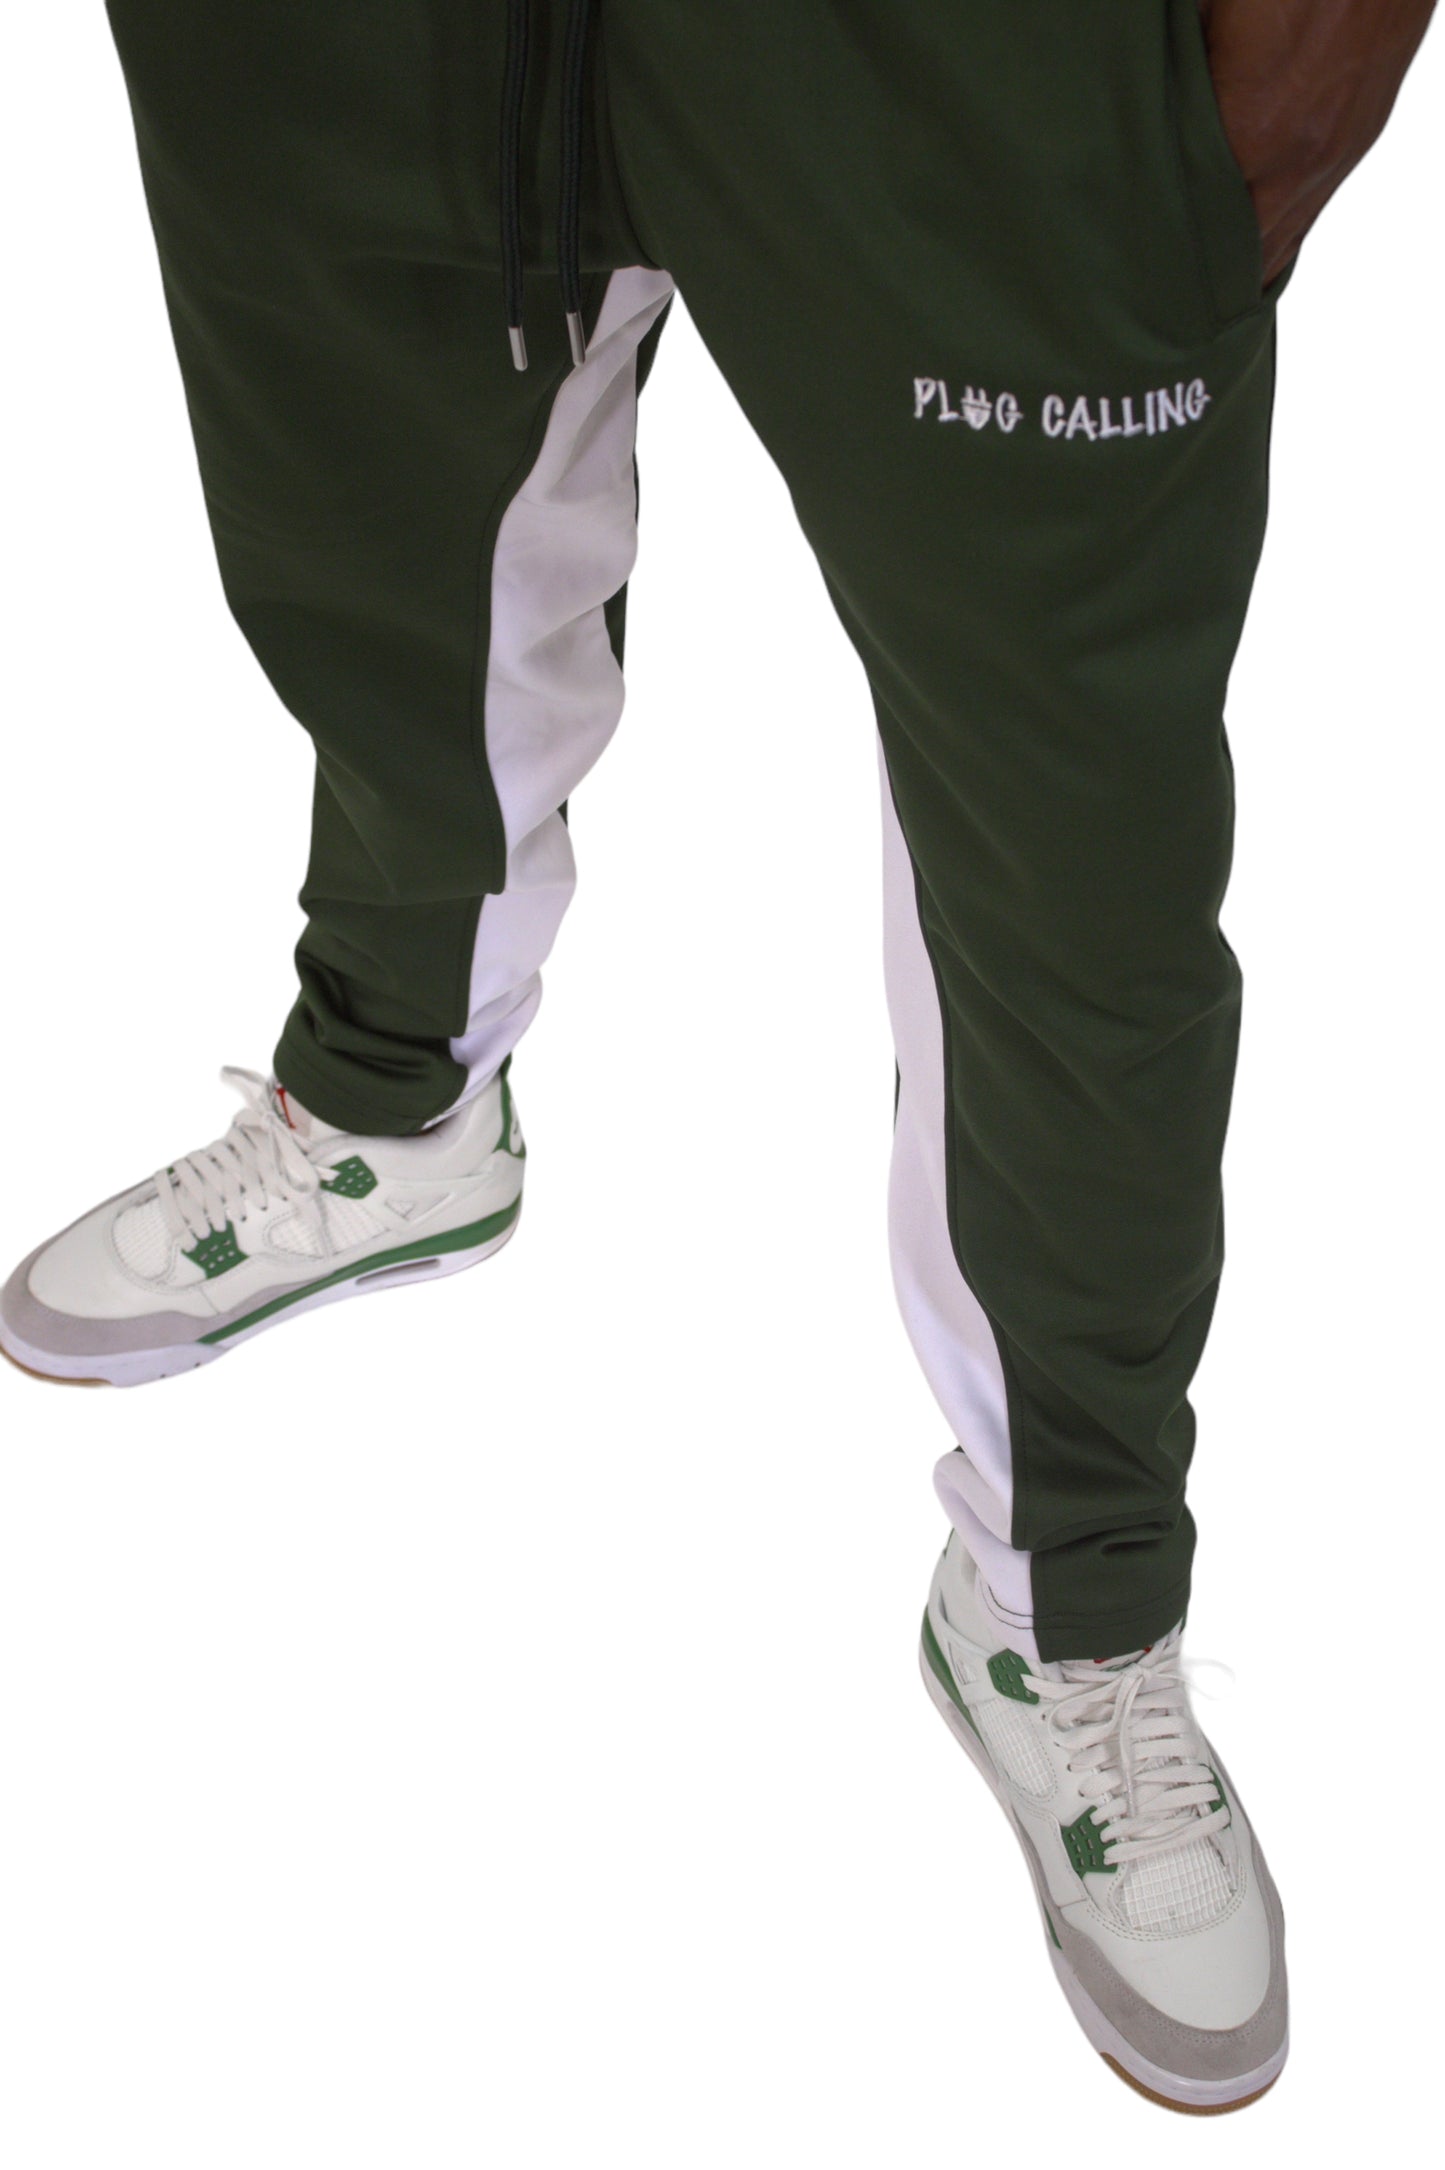 PC TRACKSUIT BOTTOMS - GREEN